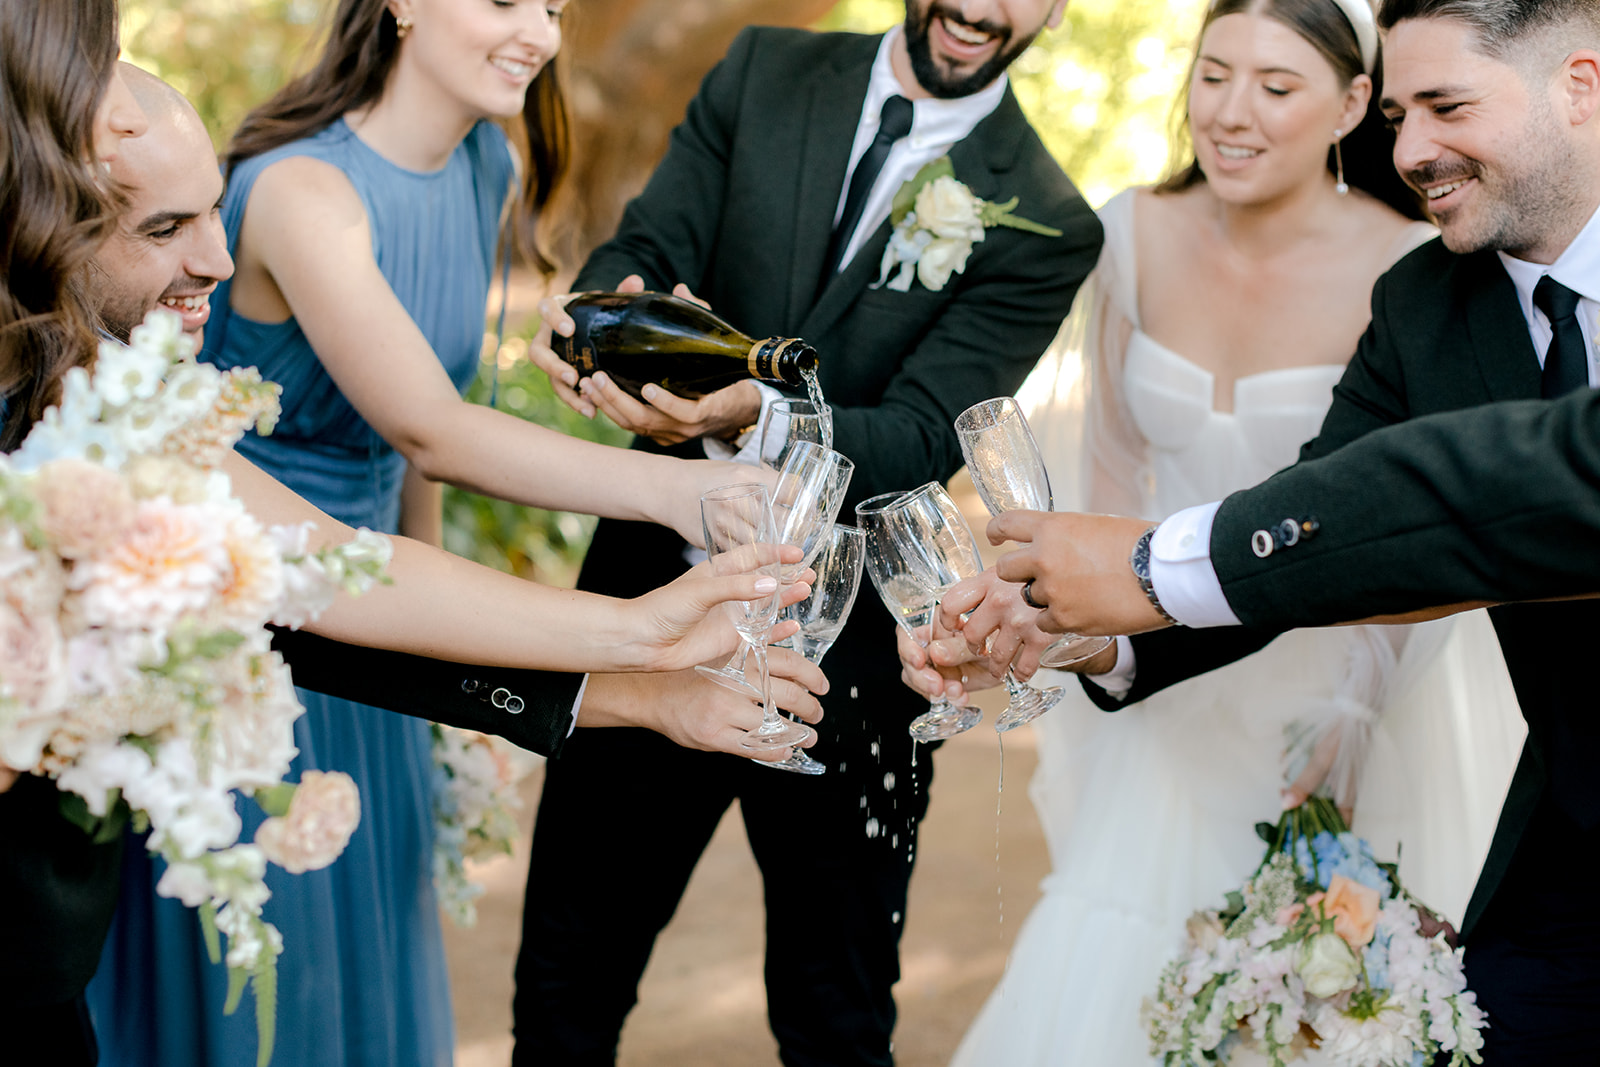 Bride & groom popping champagne with their wedding party during their elegant country wedding.